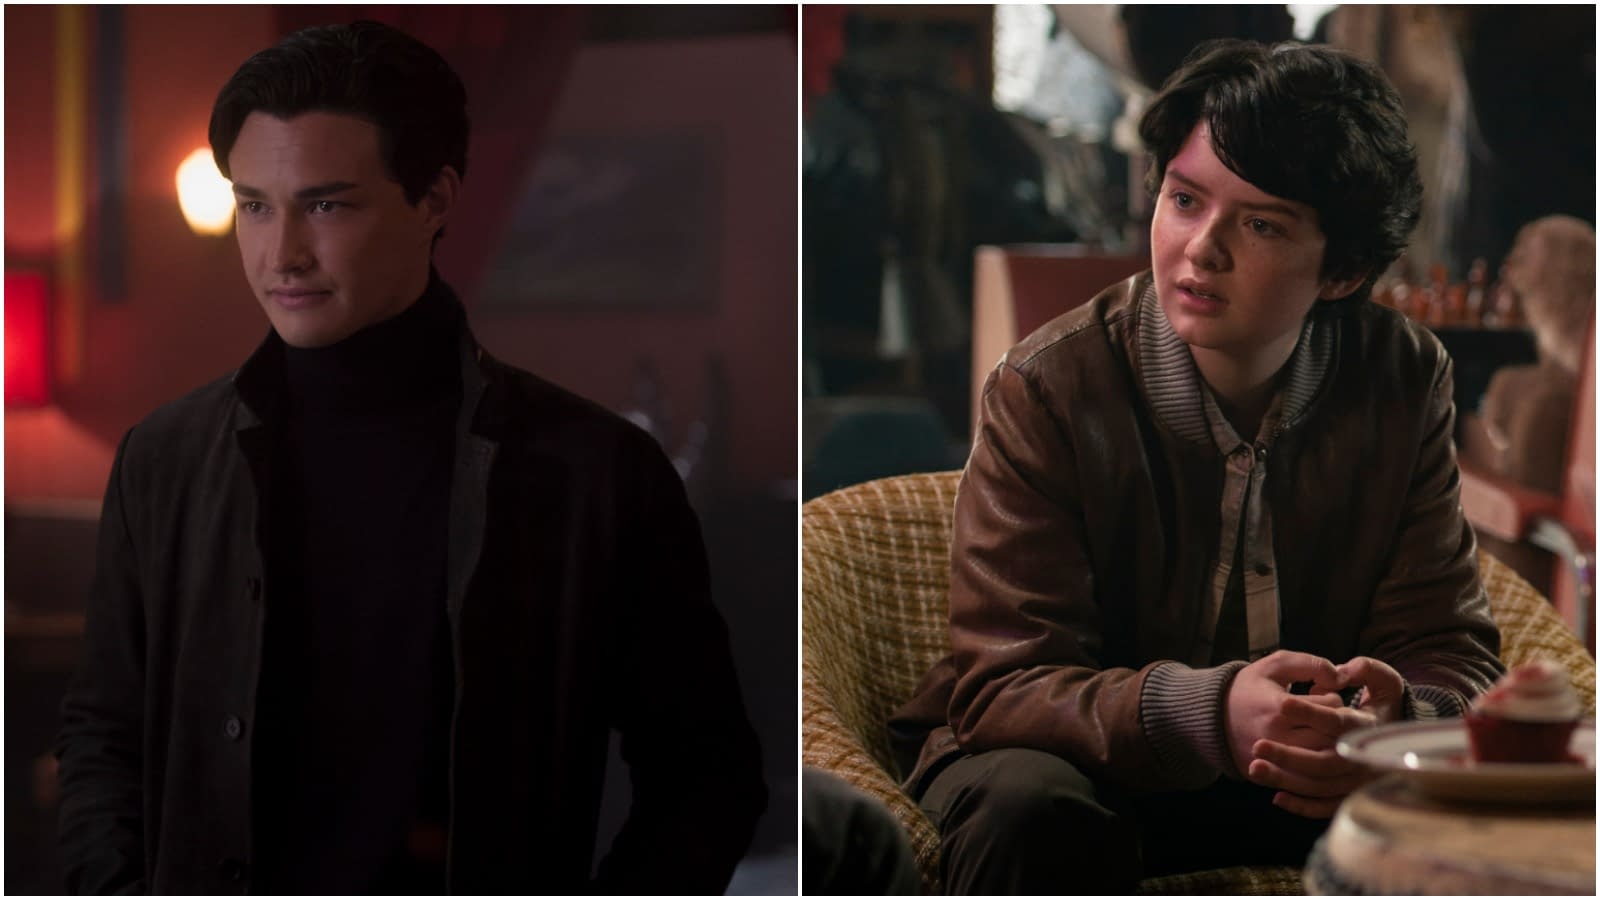 "Chilling Adventures of Sabrina": Gavin Leatherwood, Lachlan Watson Promoted to Series Regulars